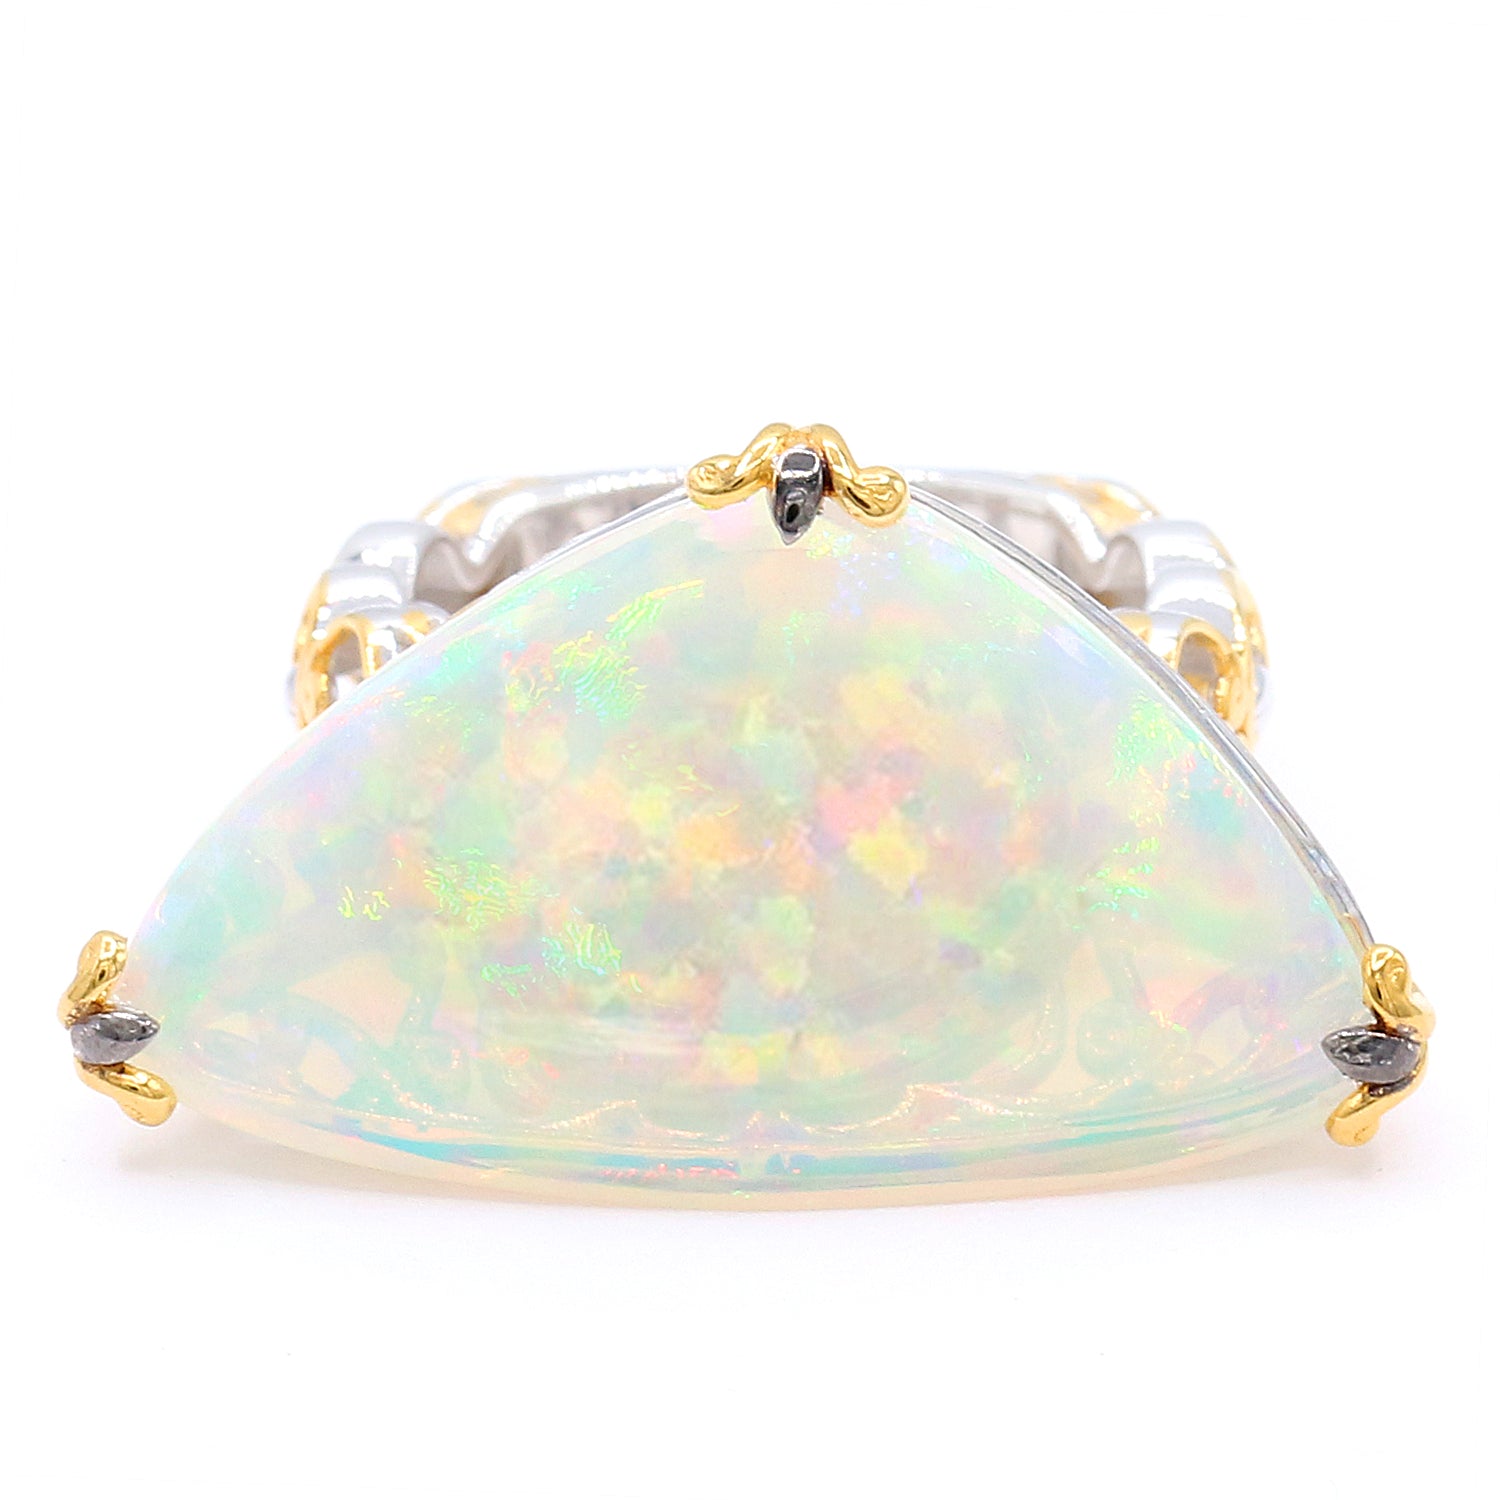 Limited Edition Gems en Vogue Luxe One-of-a-Kind 10.73ctw Trillion Ethiopian Opal Ring